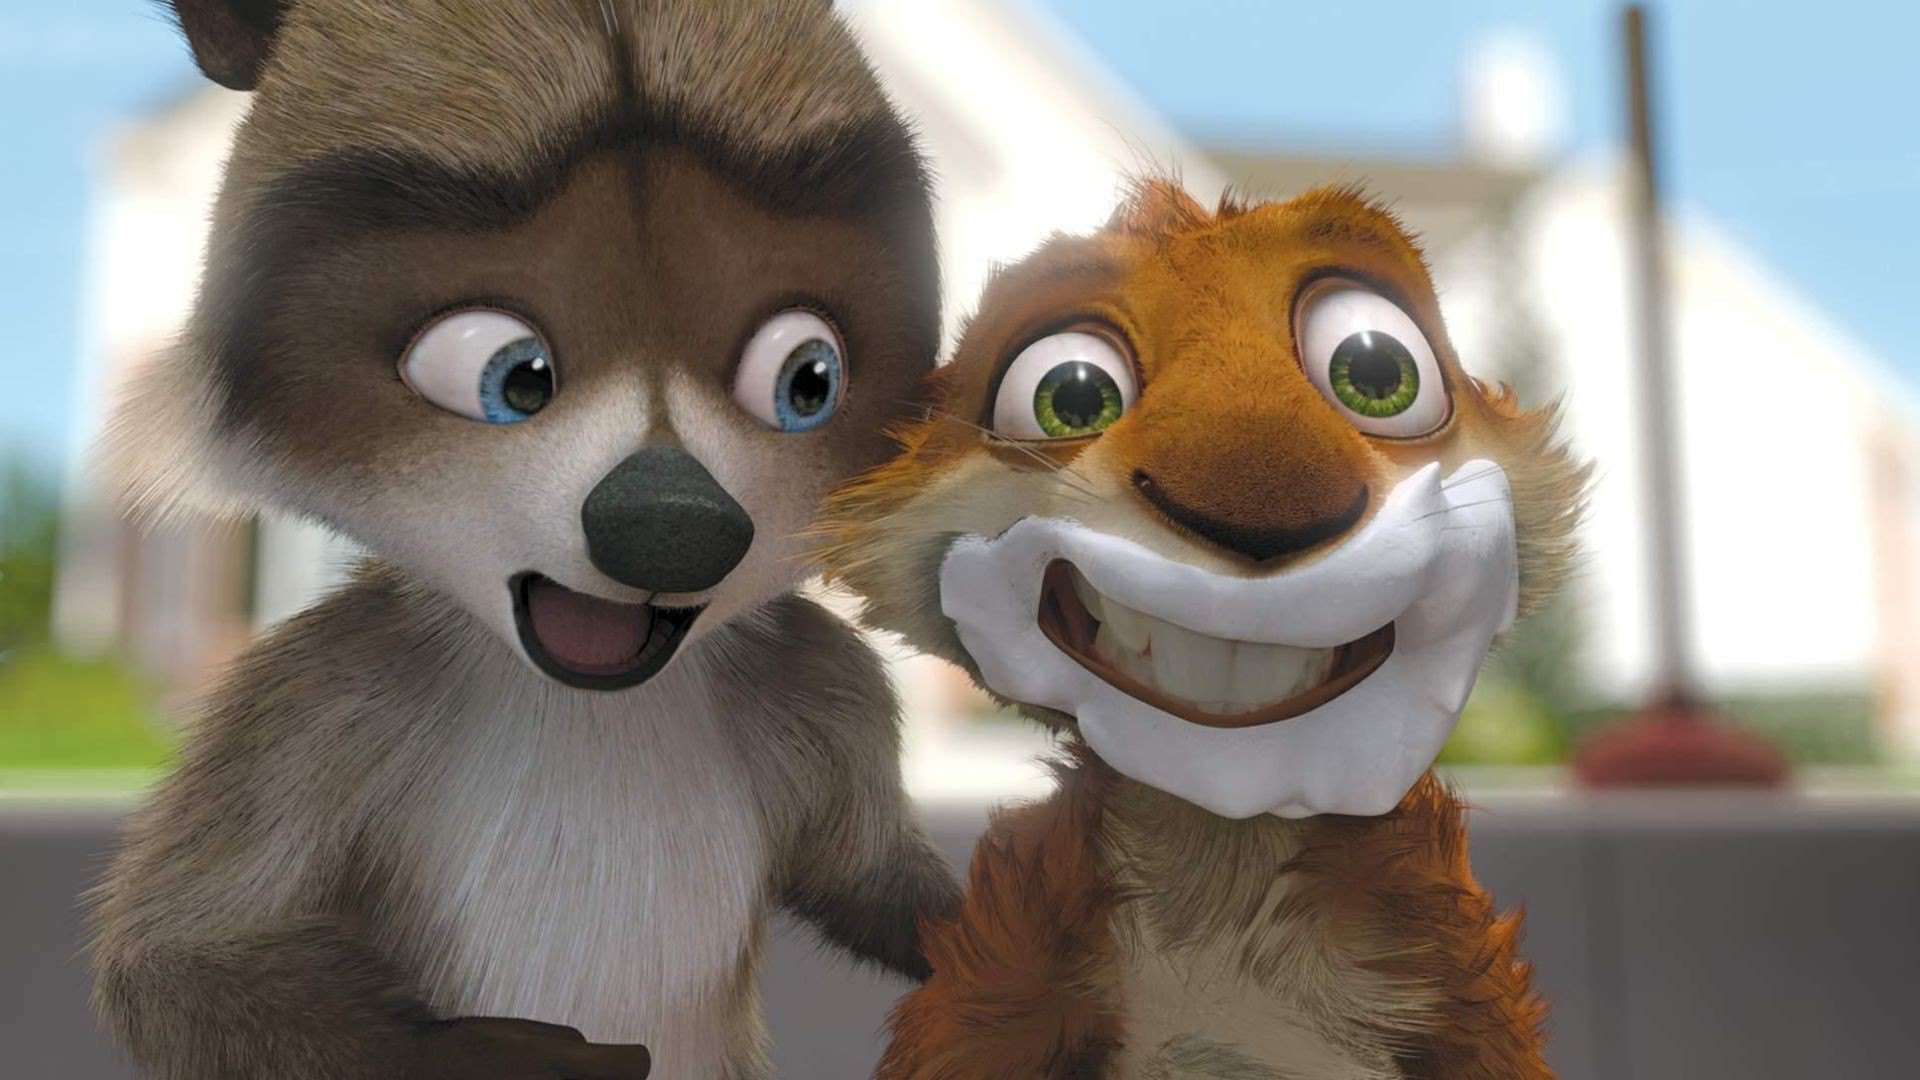 over the hedge 2